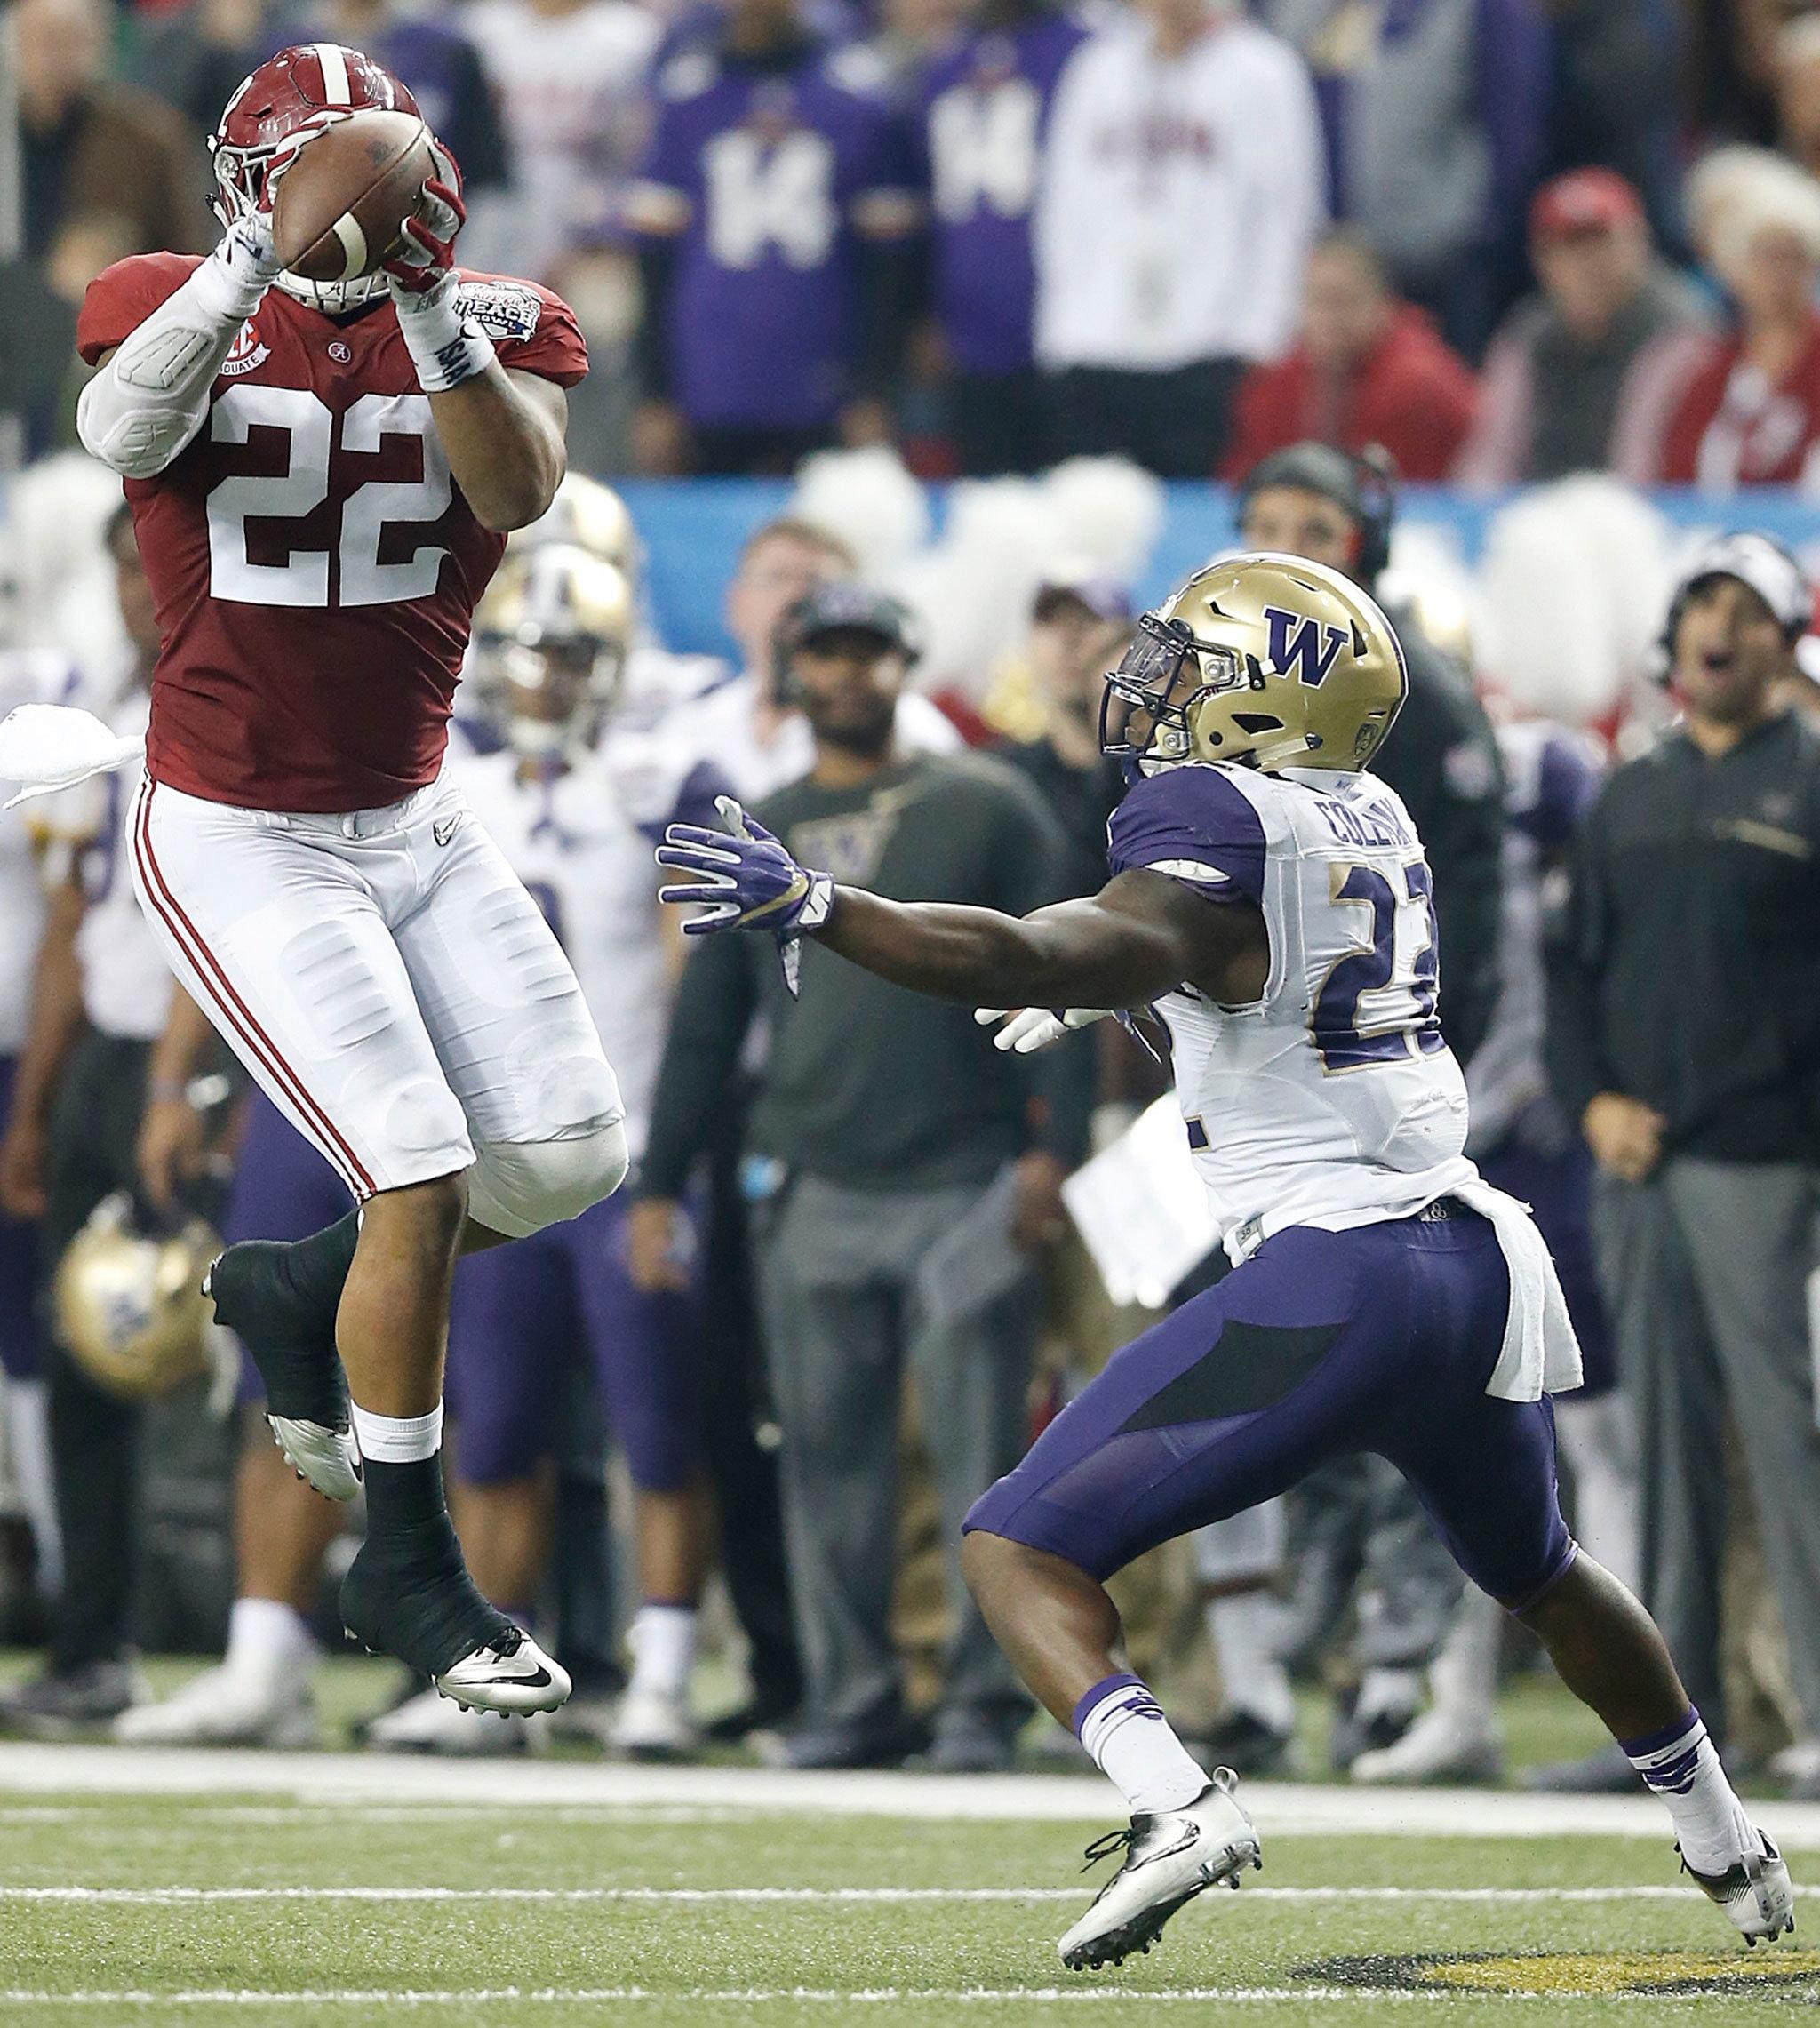 Alabama linebacker Ryan Anderson (22) picks off a pass intended for Washington running back Lavon Coleman (22) during the first half of the Peach Bowl on Saturday in Atlanta. Anderson returned the interception for an Alabama touchdown. (AP Photo/Skip Martin)